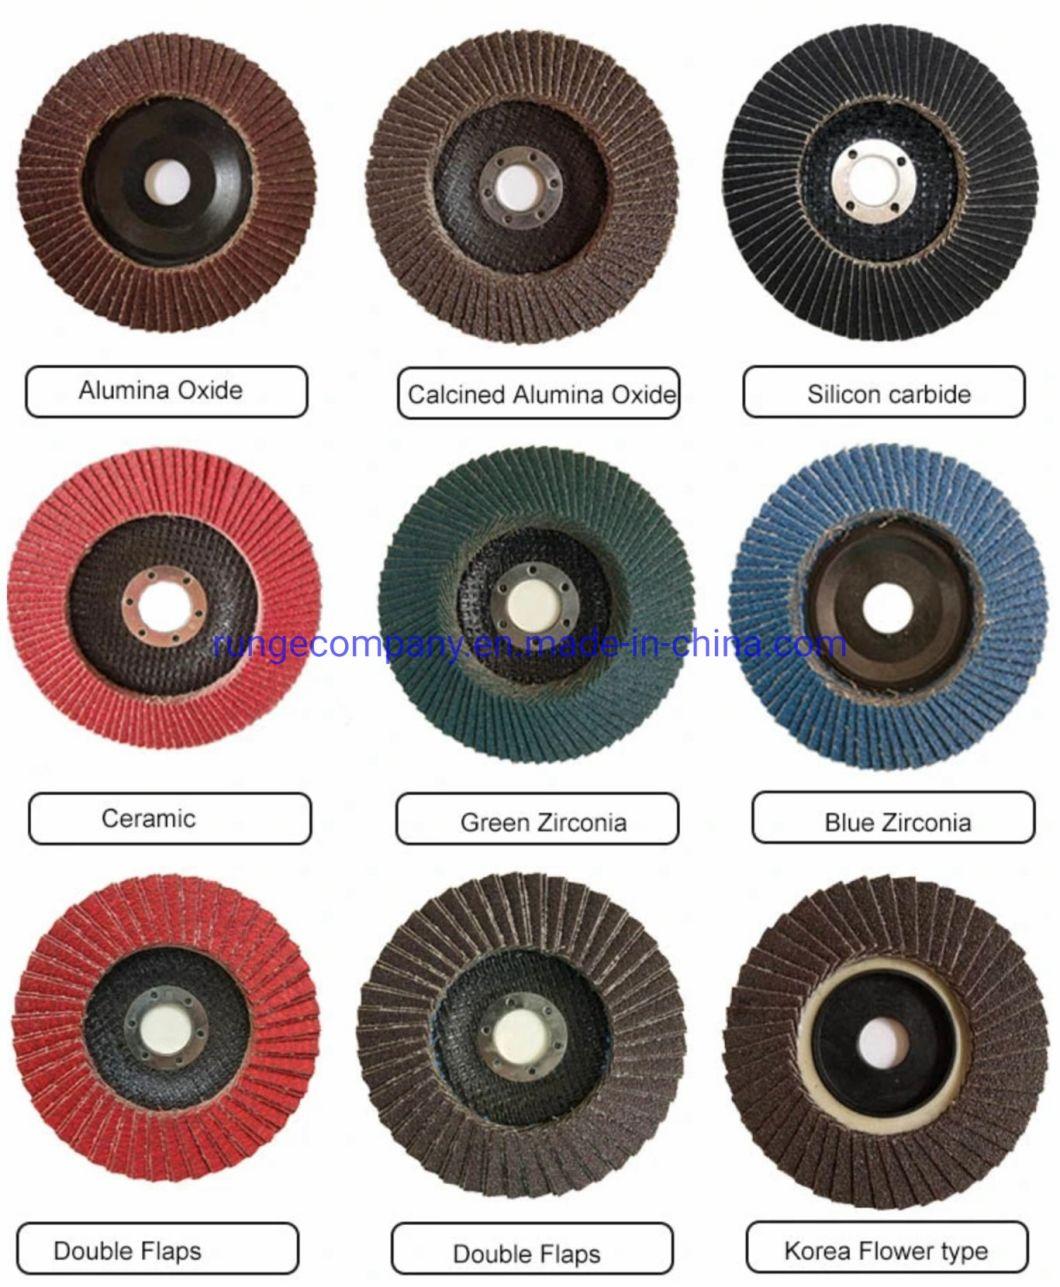 2X1X1/4" Grinding Wheel Discs Cylindrical Head Sandpaper Abrasive Flap Wheel for Stainless Steel Metal Power Tools